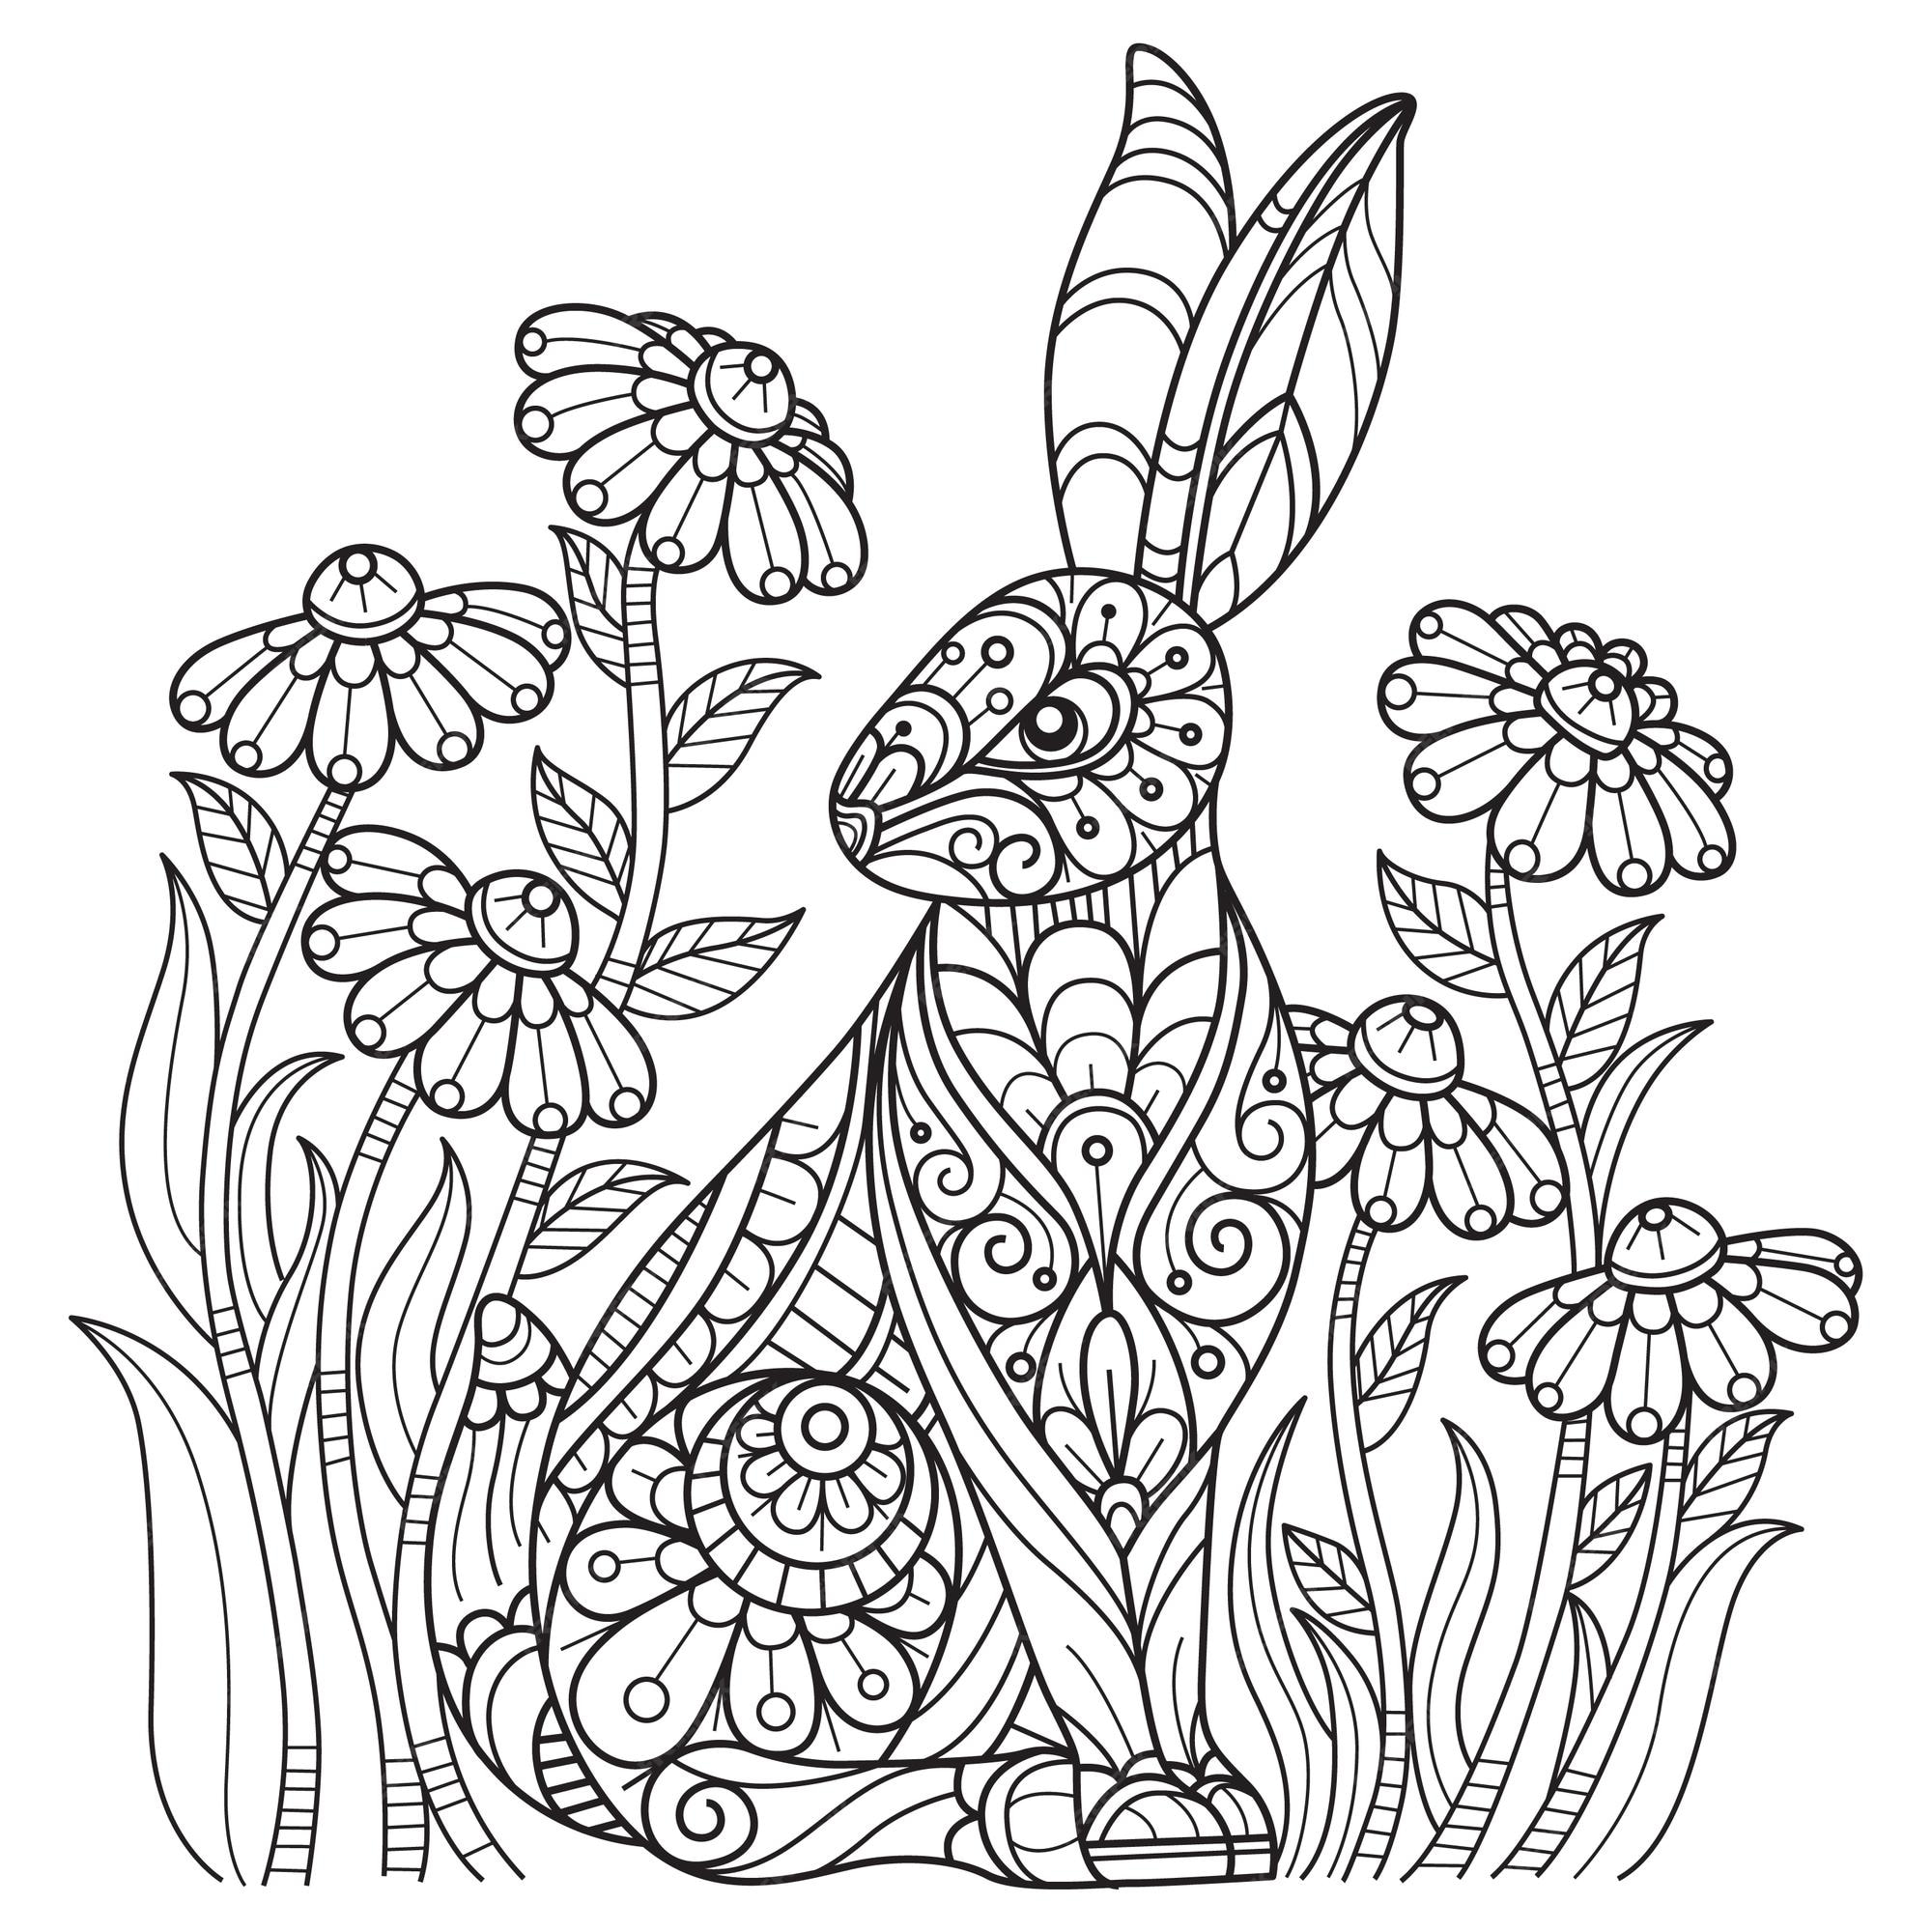 Premium vector rabbit and flower garden hand drawn for adult coloring book